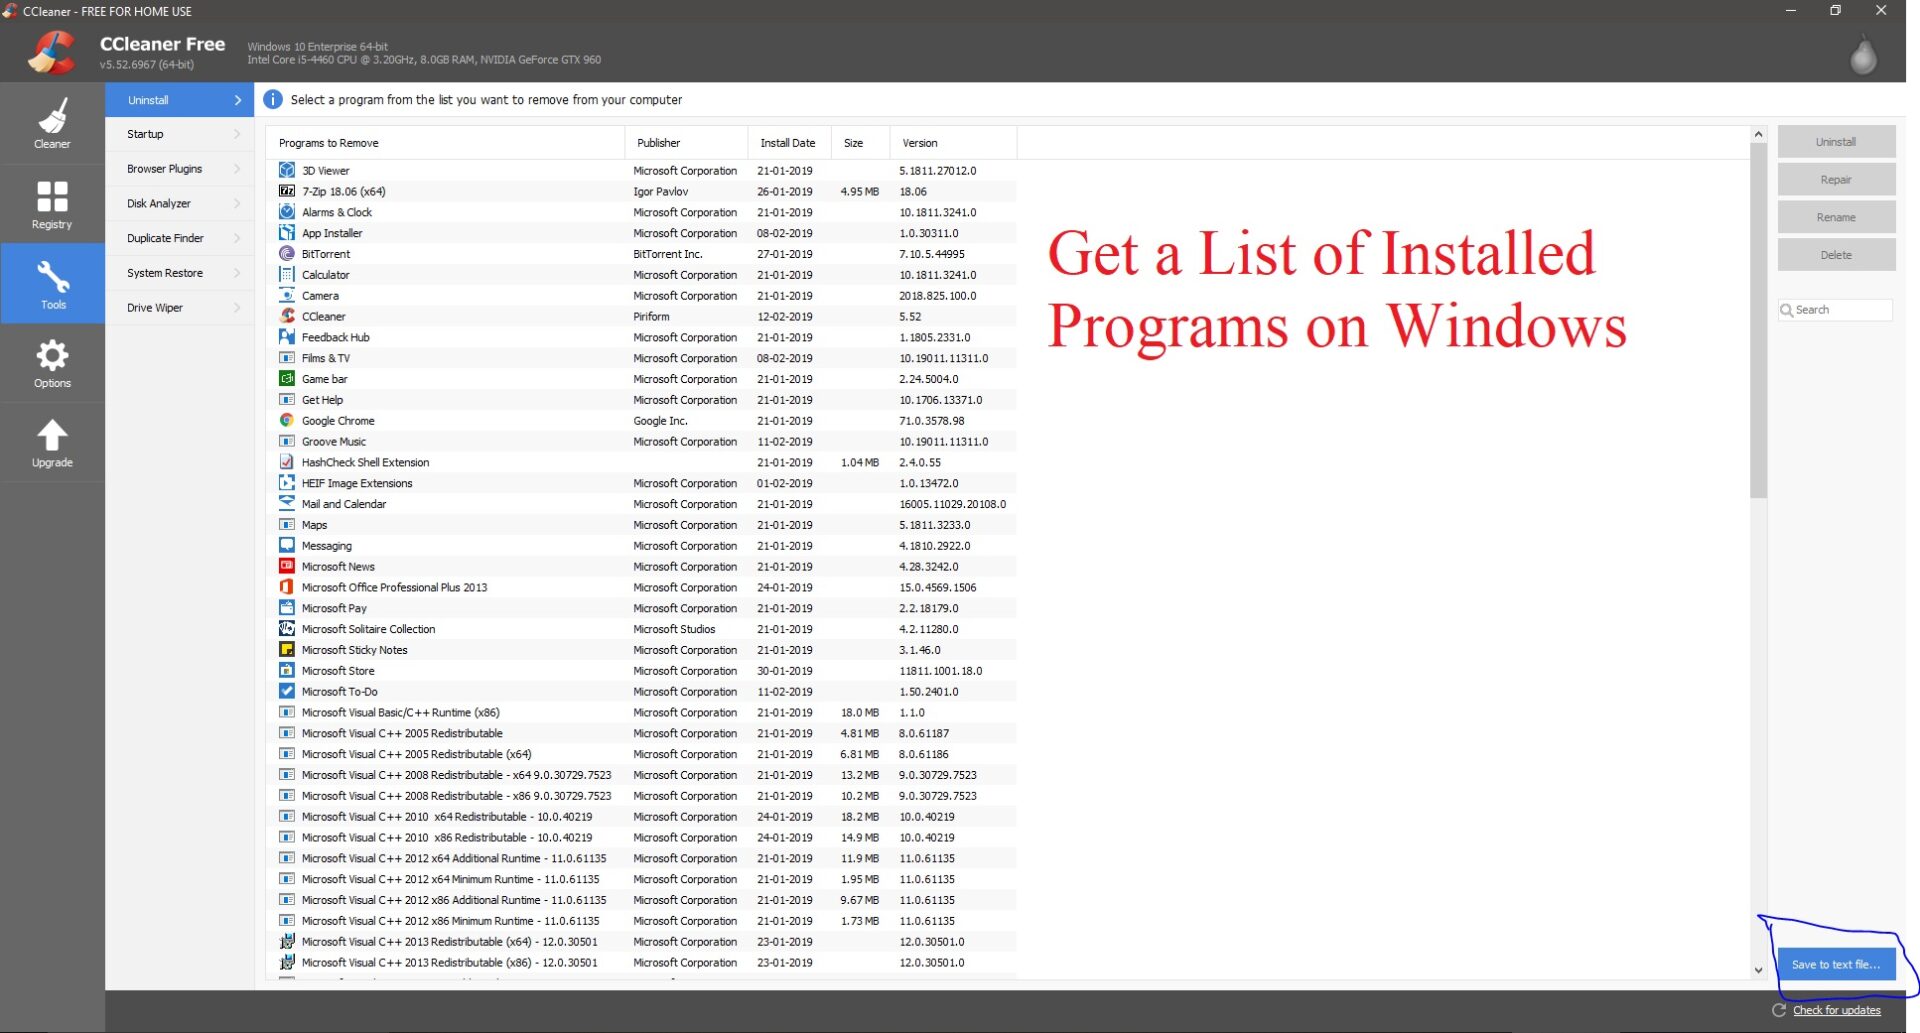 How to Get a List of Installed Programs on Windows?